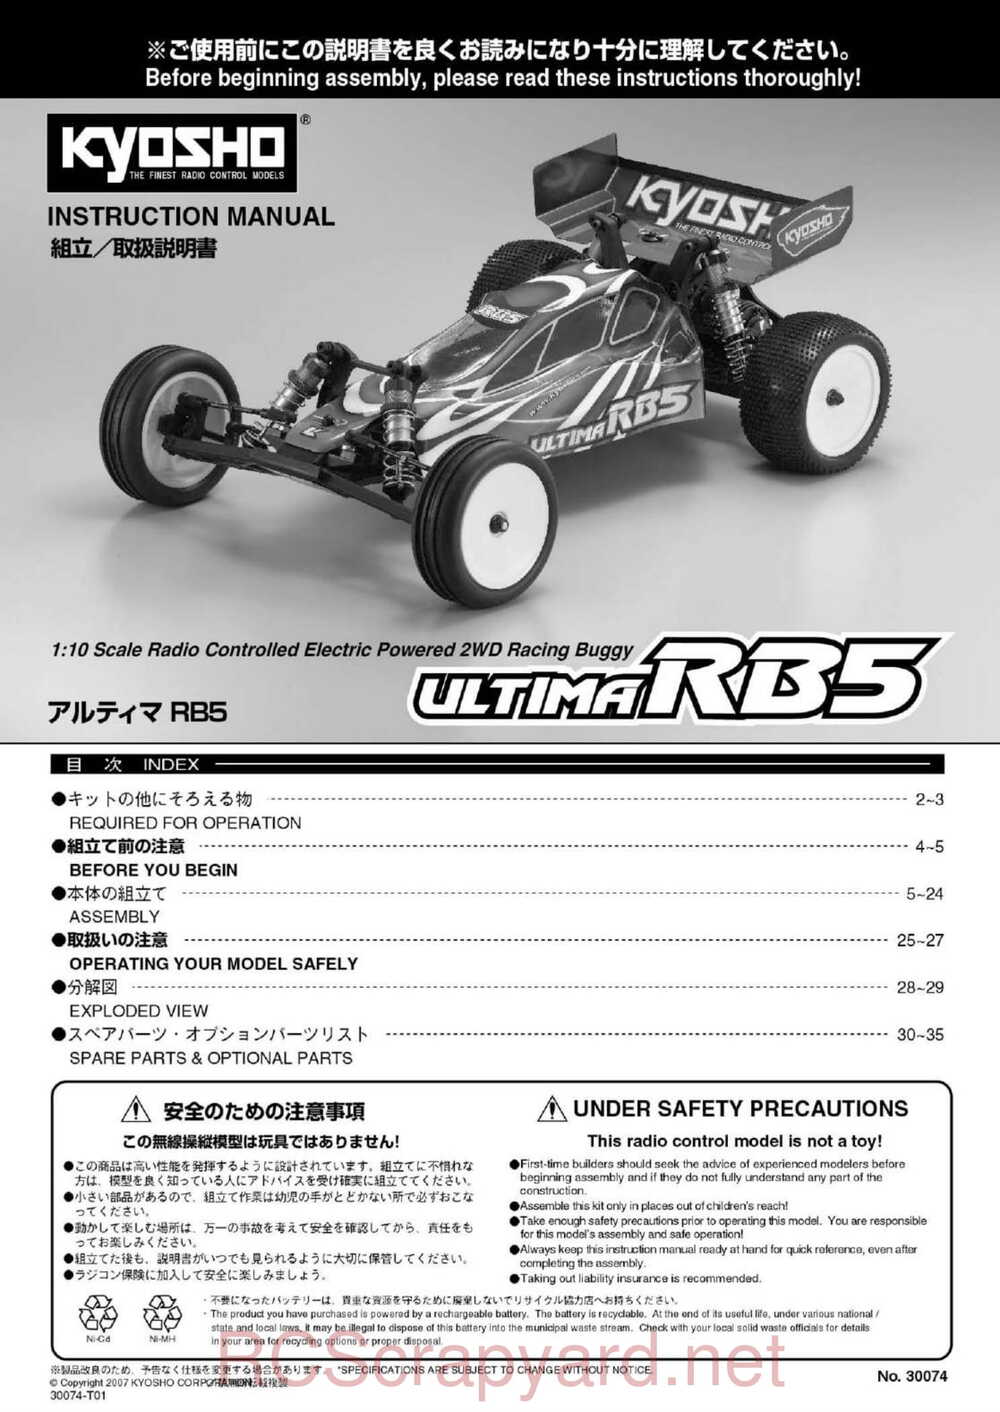 Kyosho - 30074 - Ultima-RB5 - Manual - Page 01